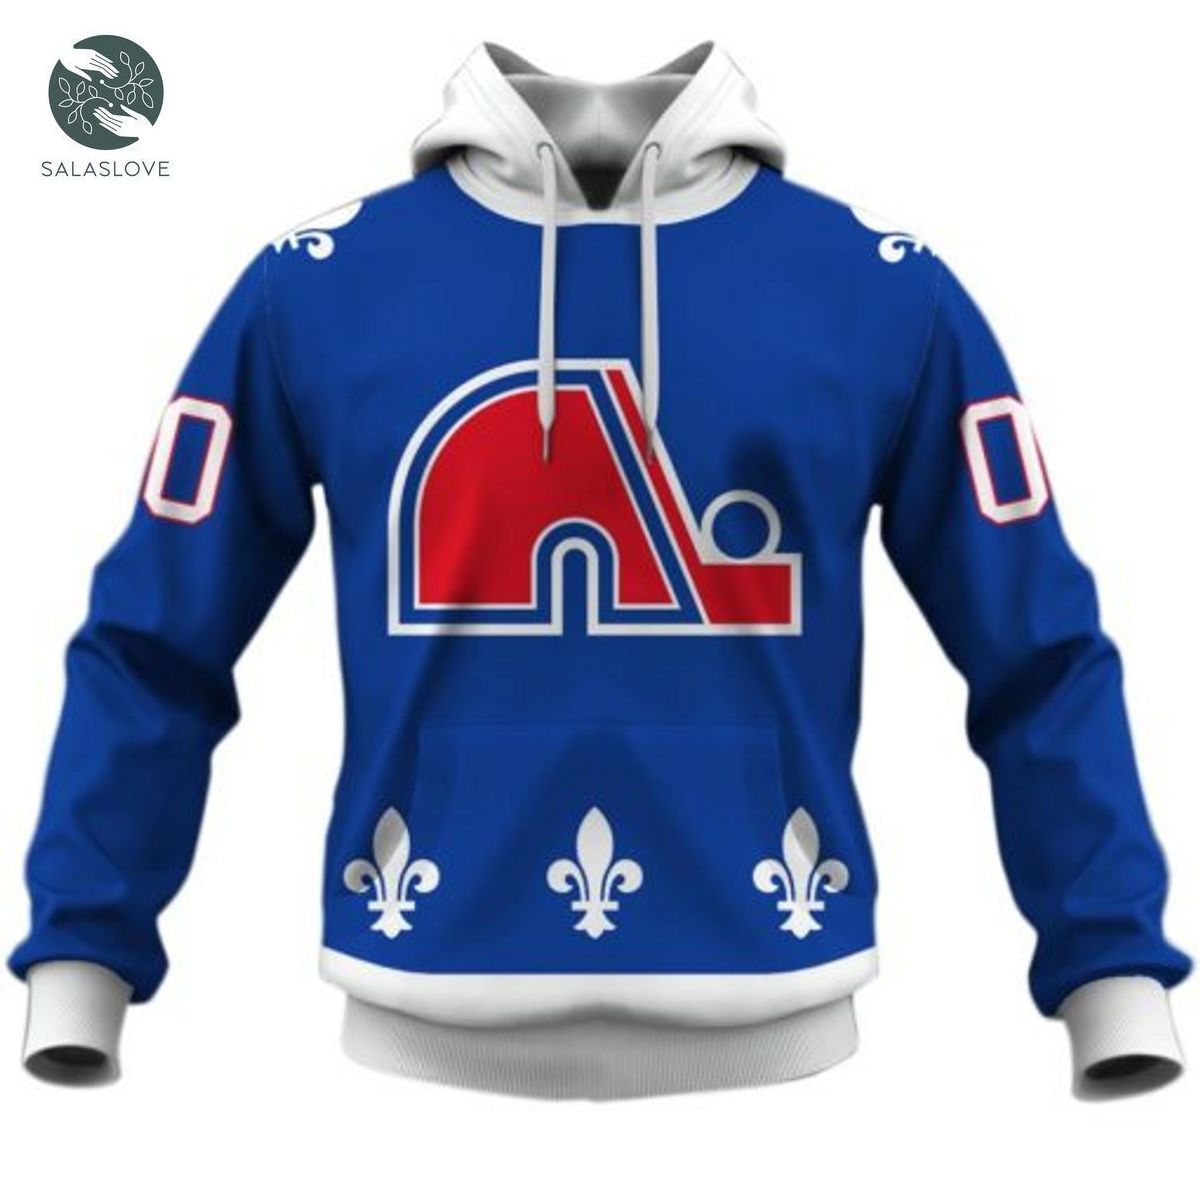 Personalized Quebec Nordiques Throwback NHL Hoodie